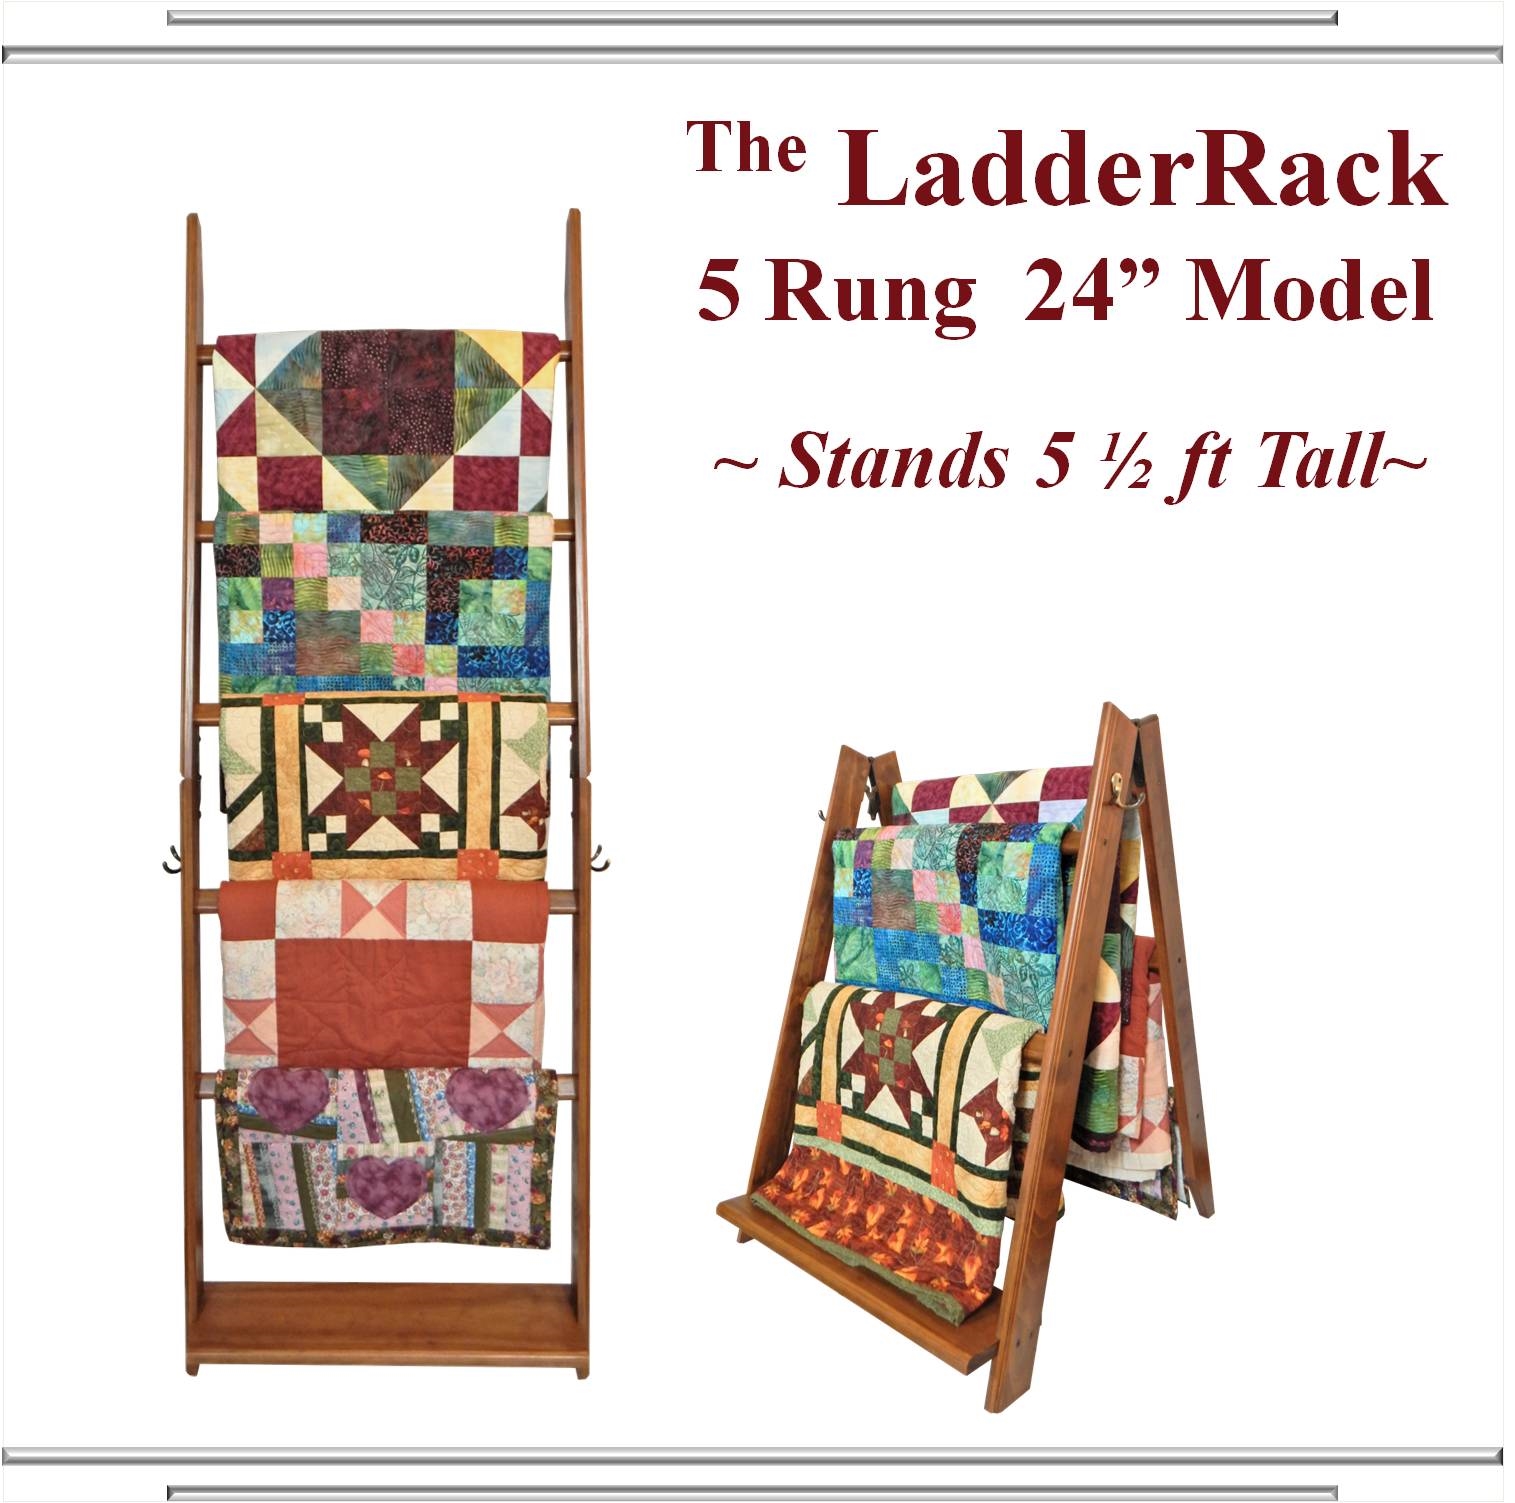 The LadderRack: Handcrafted Wood Quilt Ladder Display Rack